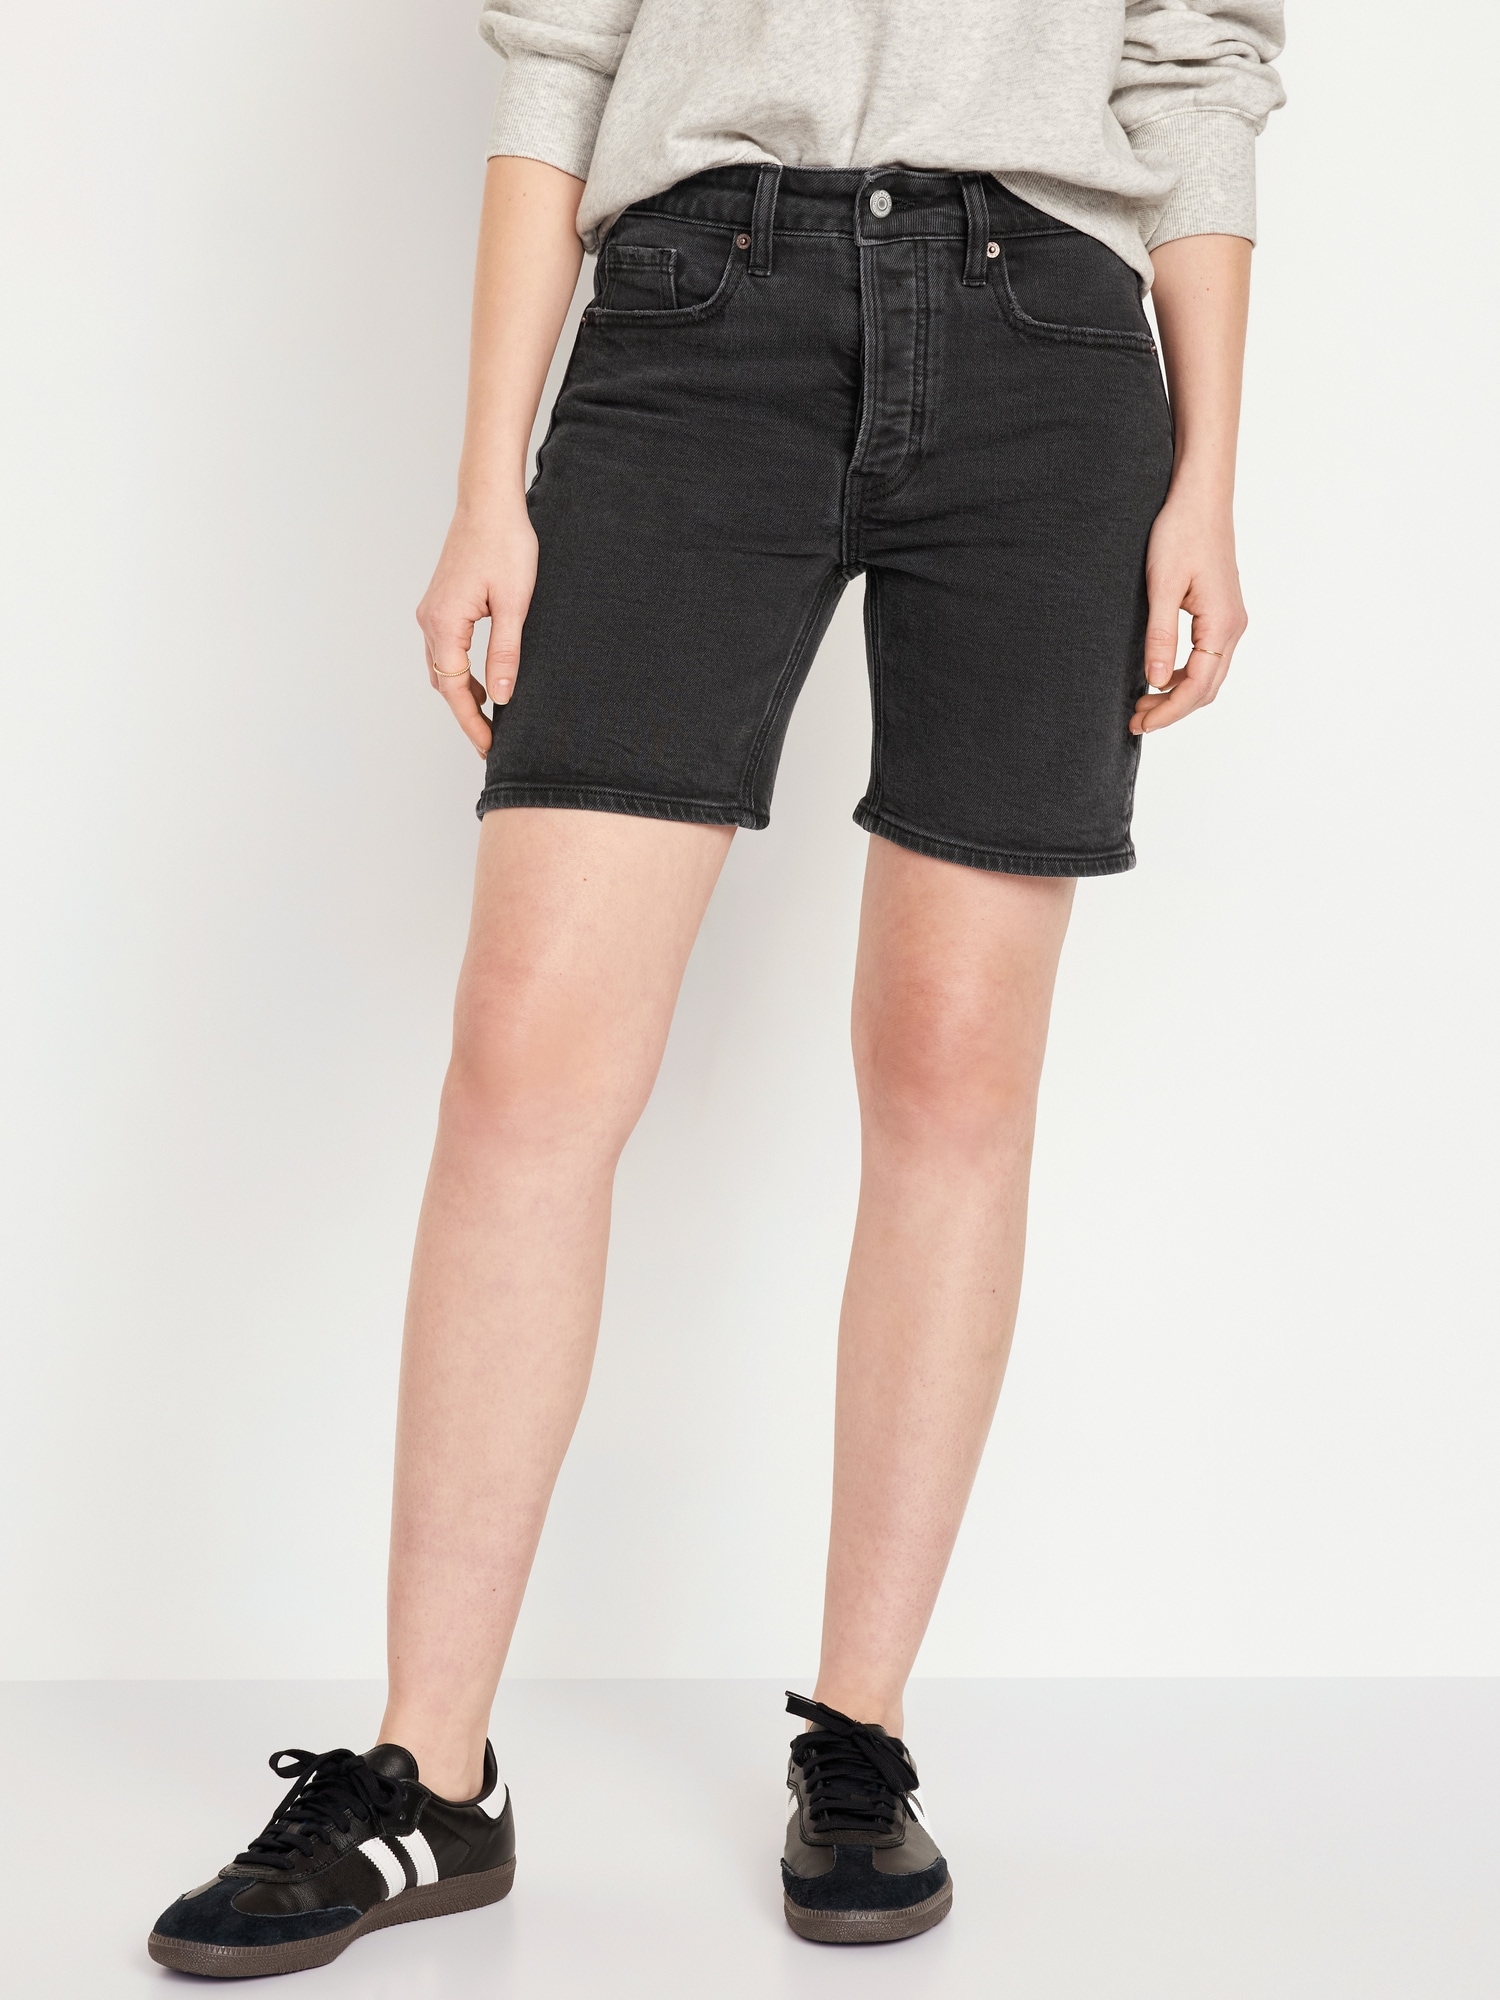 High-Waisted OG Button-Fly Jean Shorts -- 7-inch inseam Hot Deal